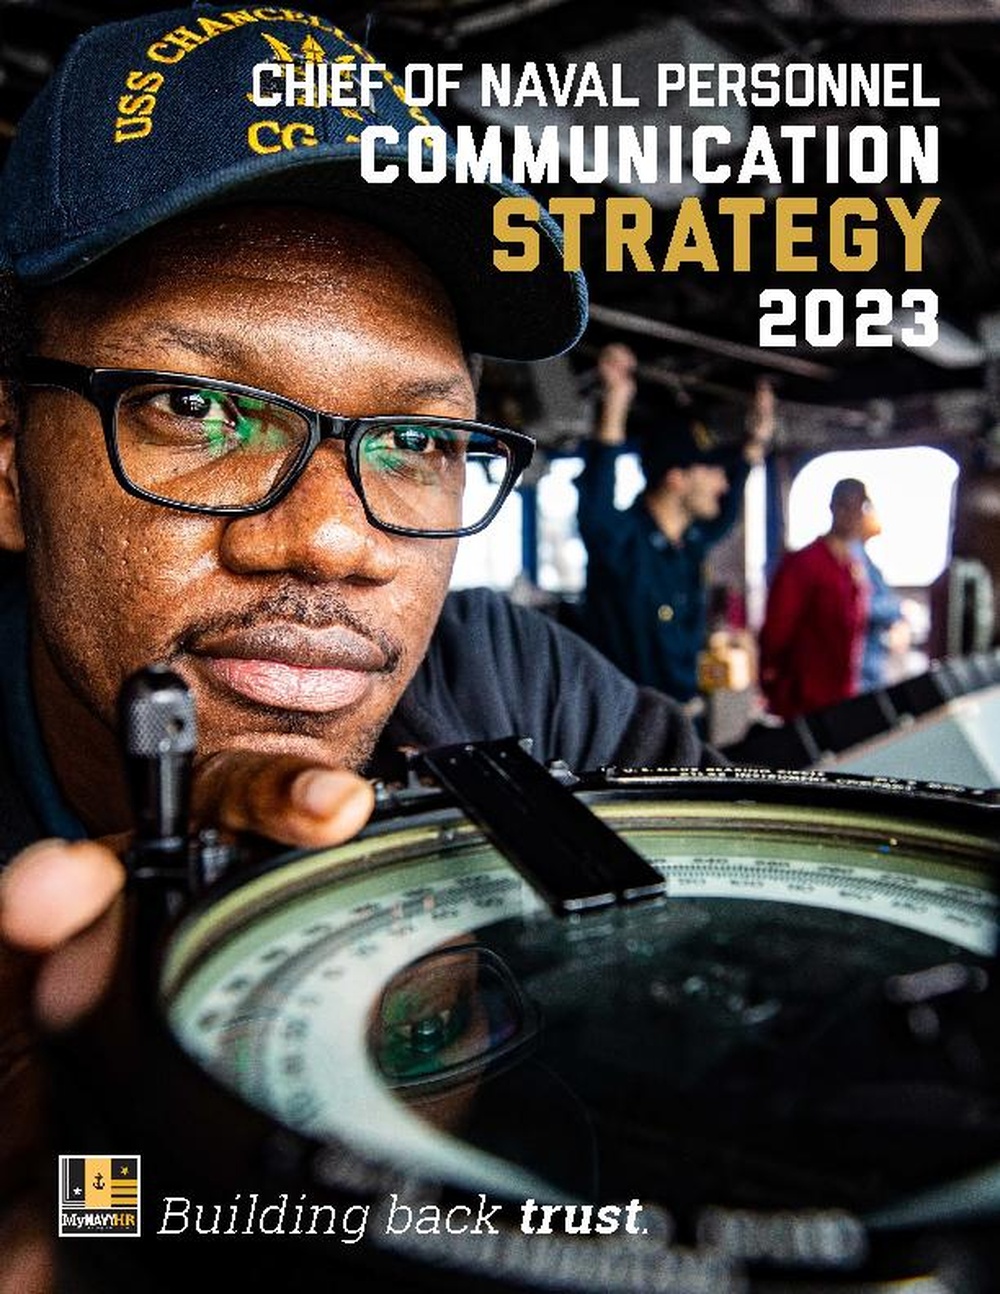 Chief of Naval Personnel Communication Strategy 2023 - Booklet (Pages)